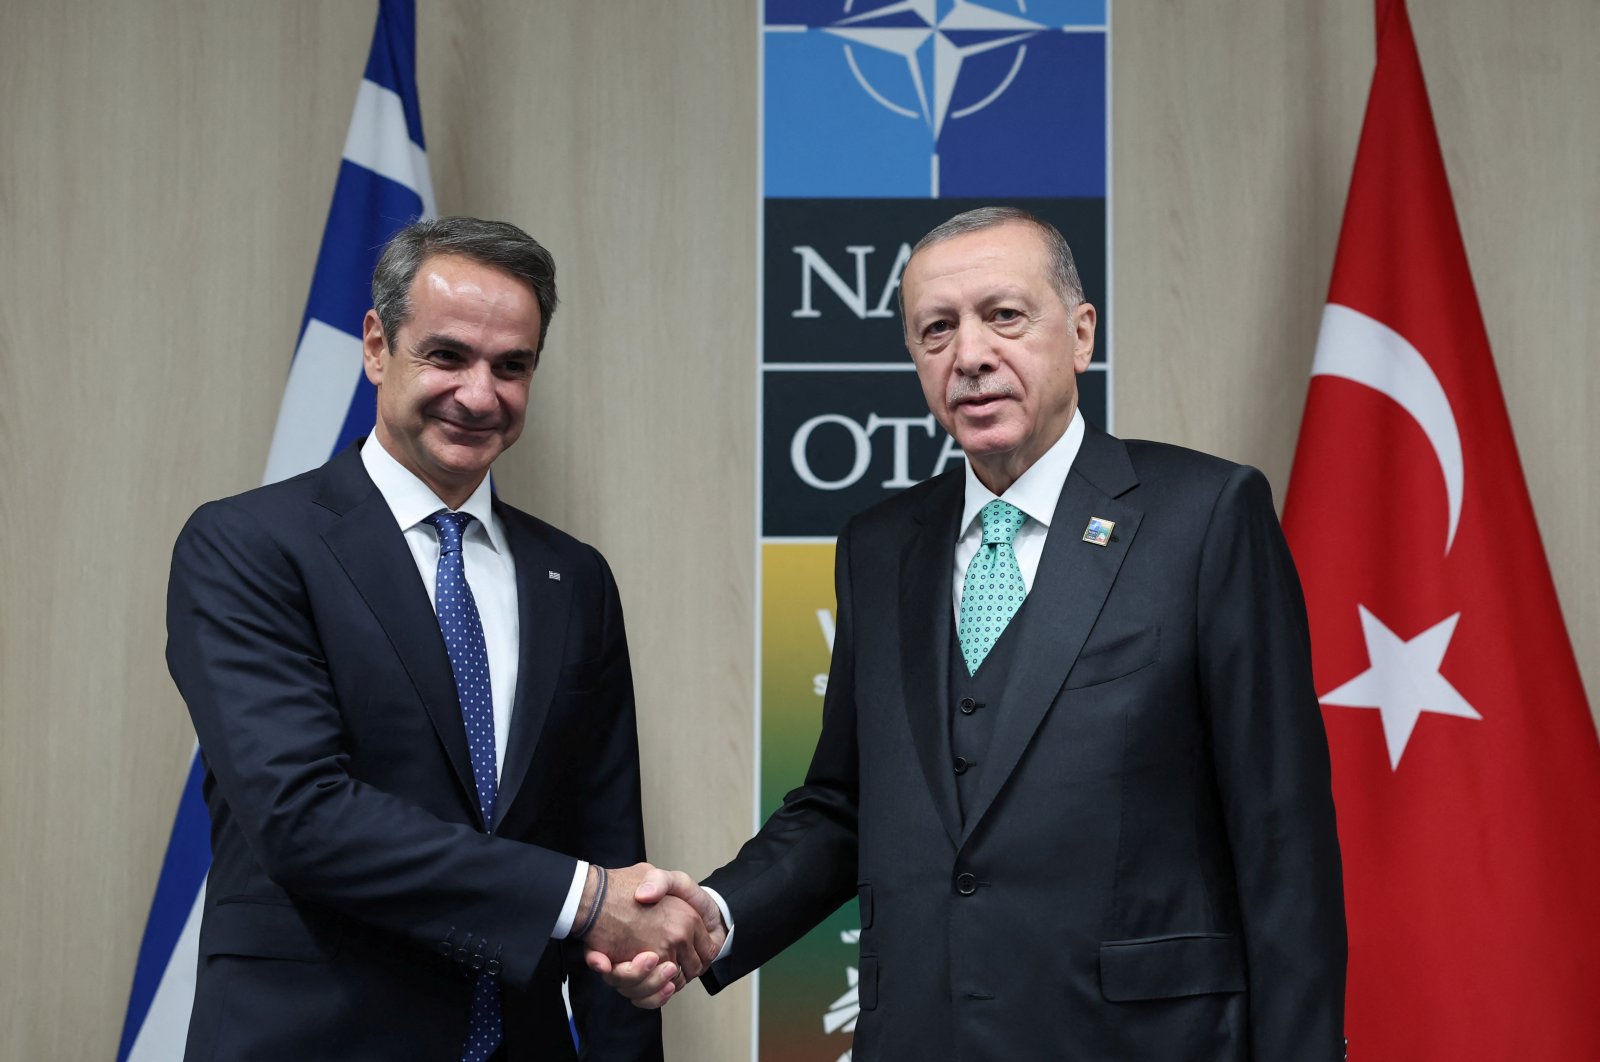 President Recep Tayyip Erdoğan (R) meets with Greek Prime Minister Kyriakos Mitsotakis during a NATO leaders summit in Vilnius, Lithuania, July 12, 2023. (Reuters Photo)